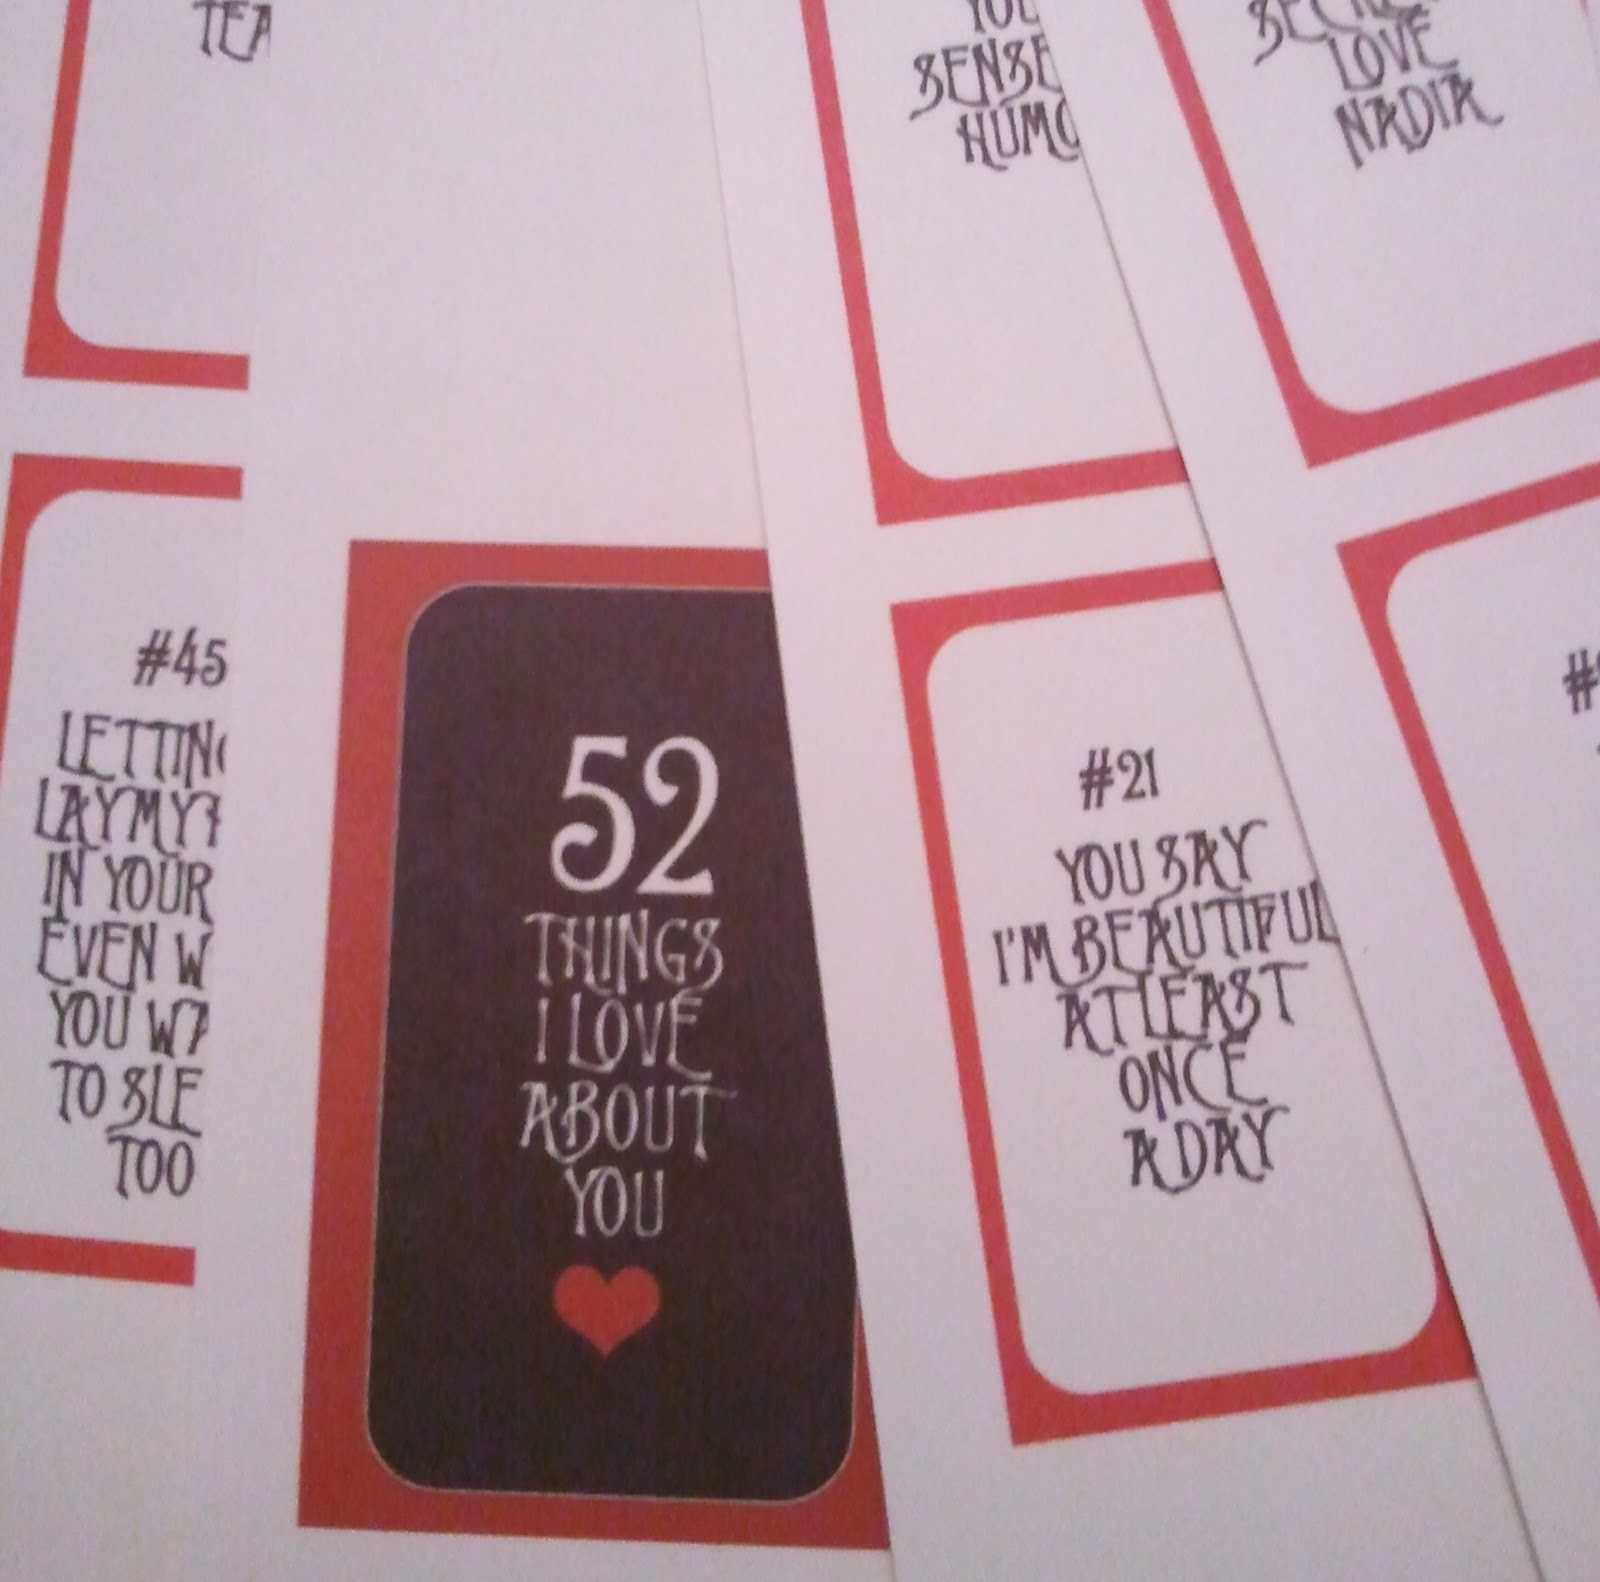 28 Images Of 52 Things Template | Vanscapital In 52 Things I Love About You Cards Template